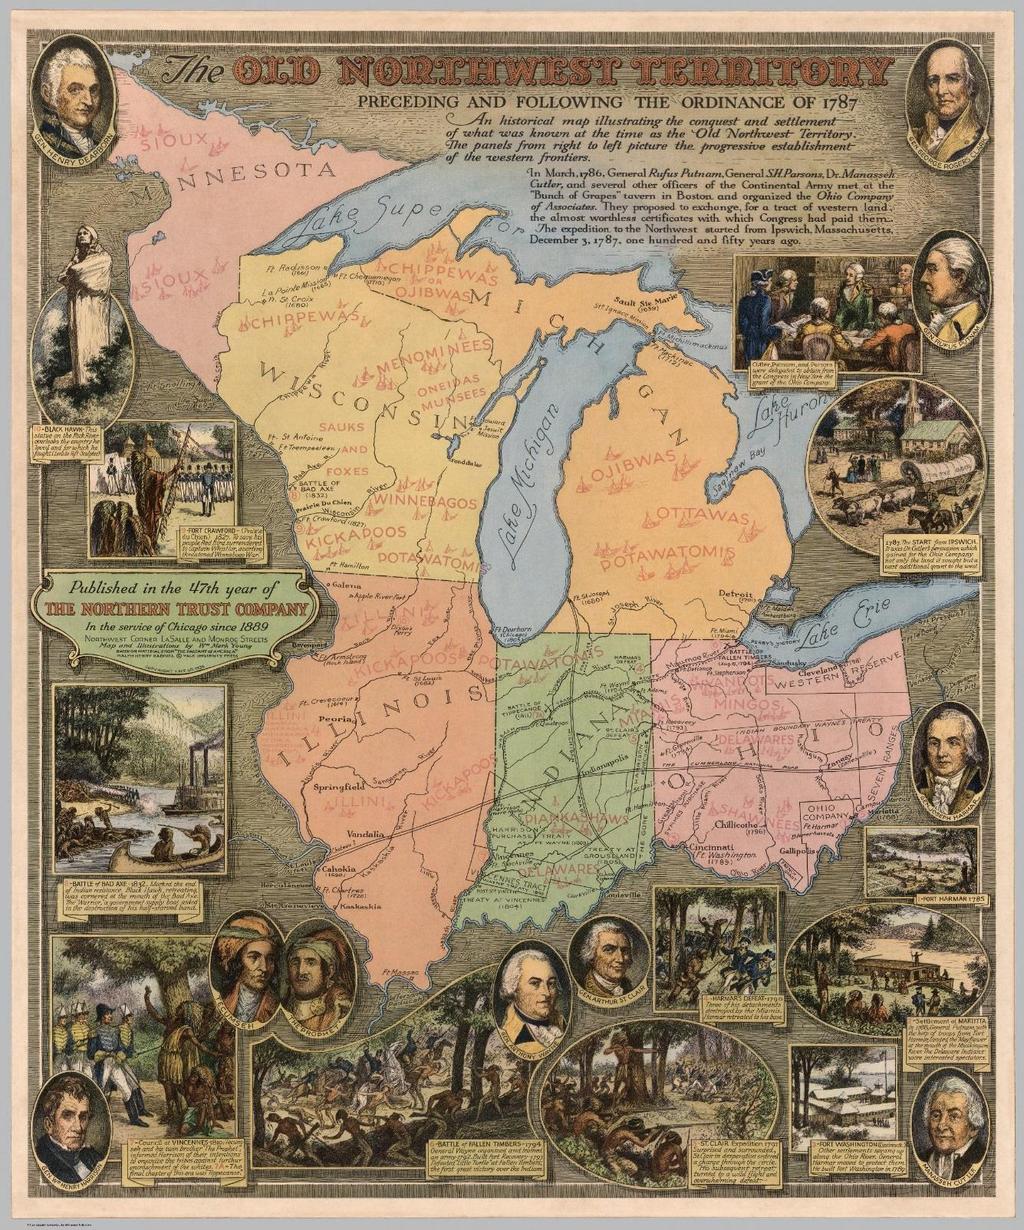 Northwest Ordinance of 1787 Original 13 colonies ceded claims in the NW Territory to the newly formed federal